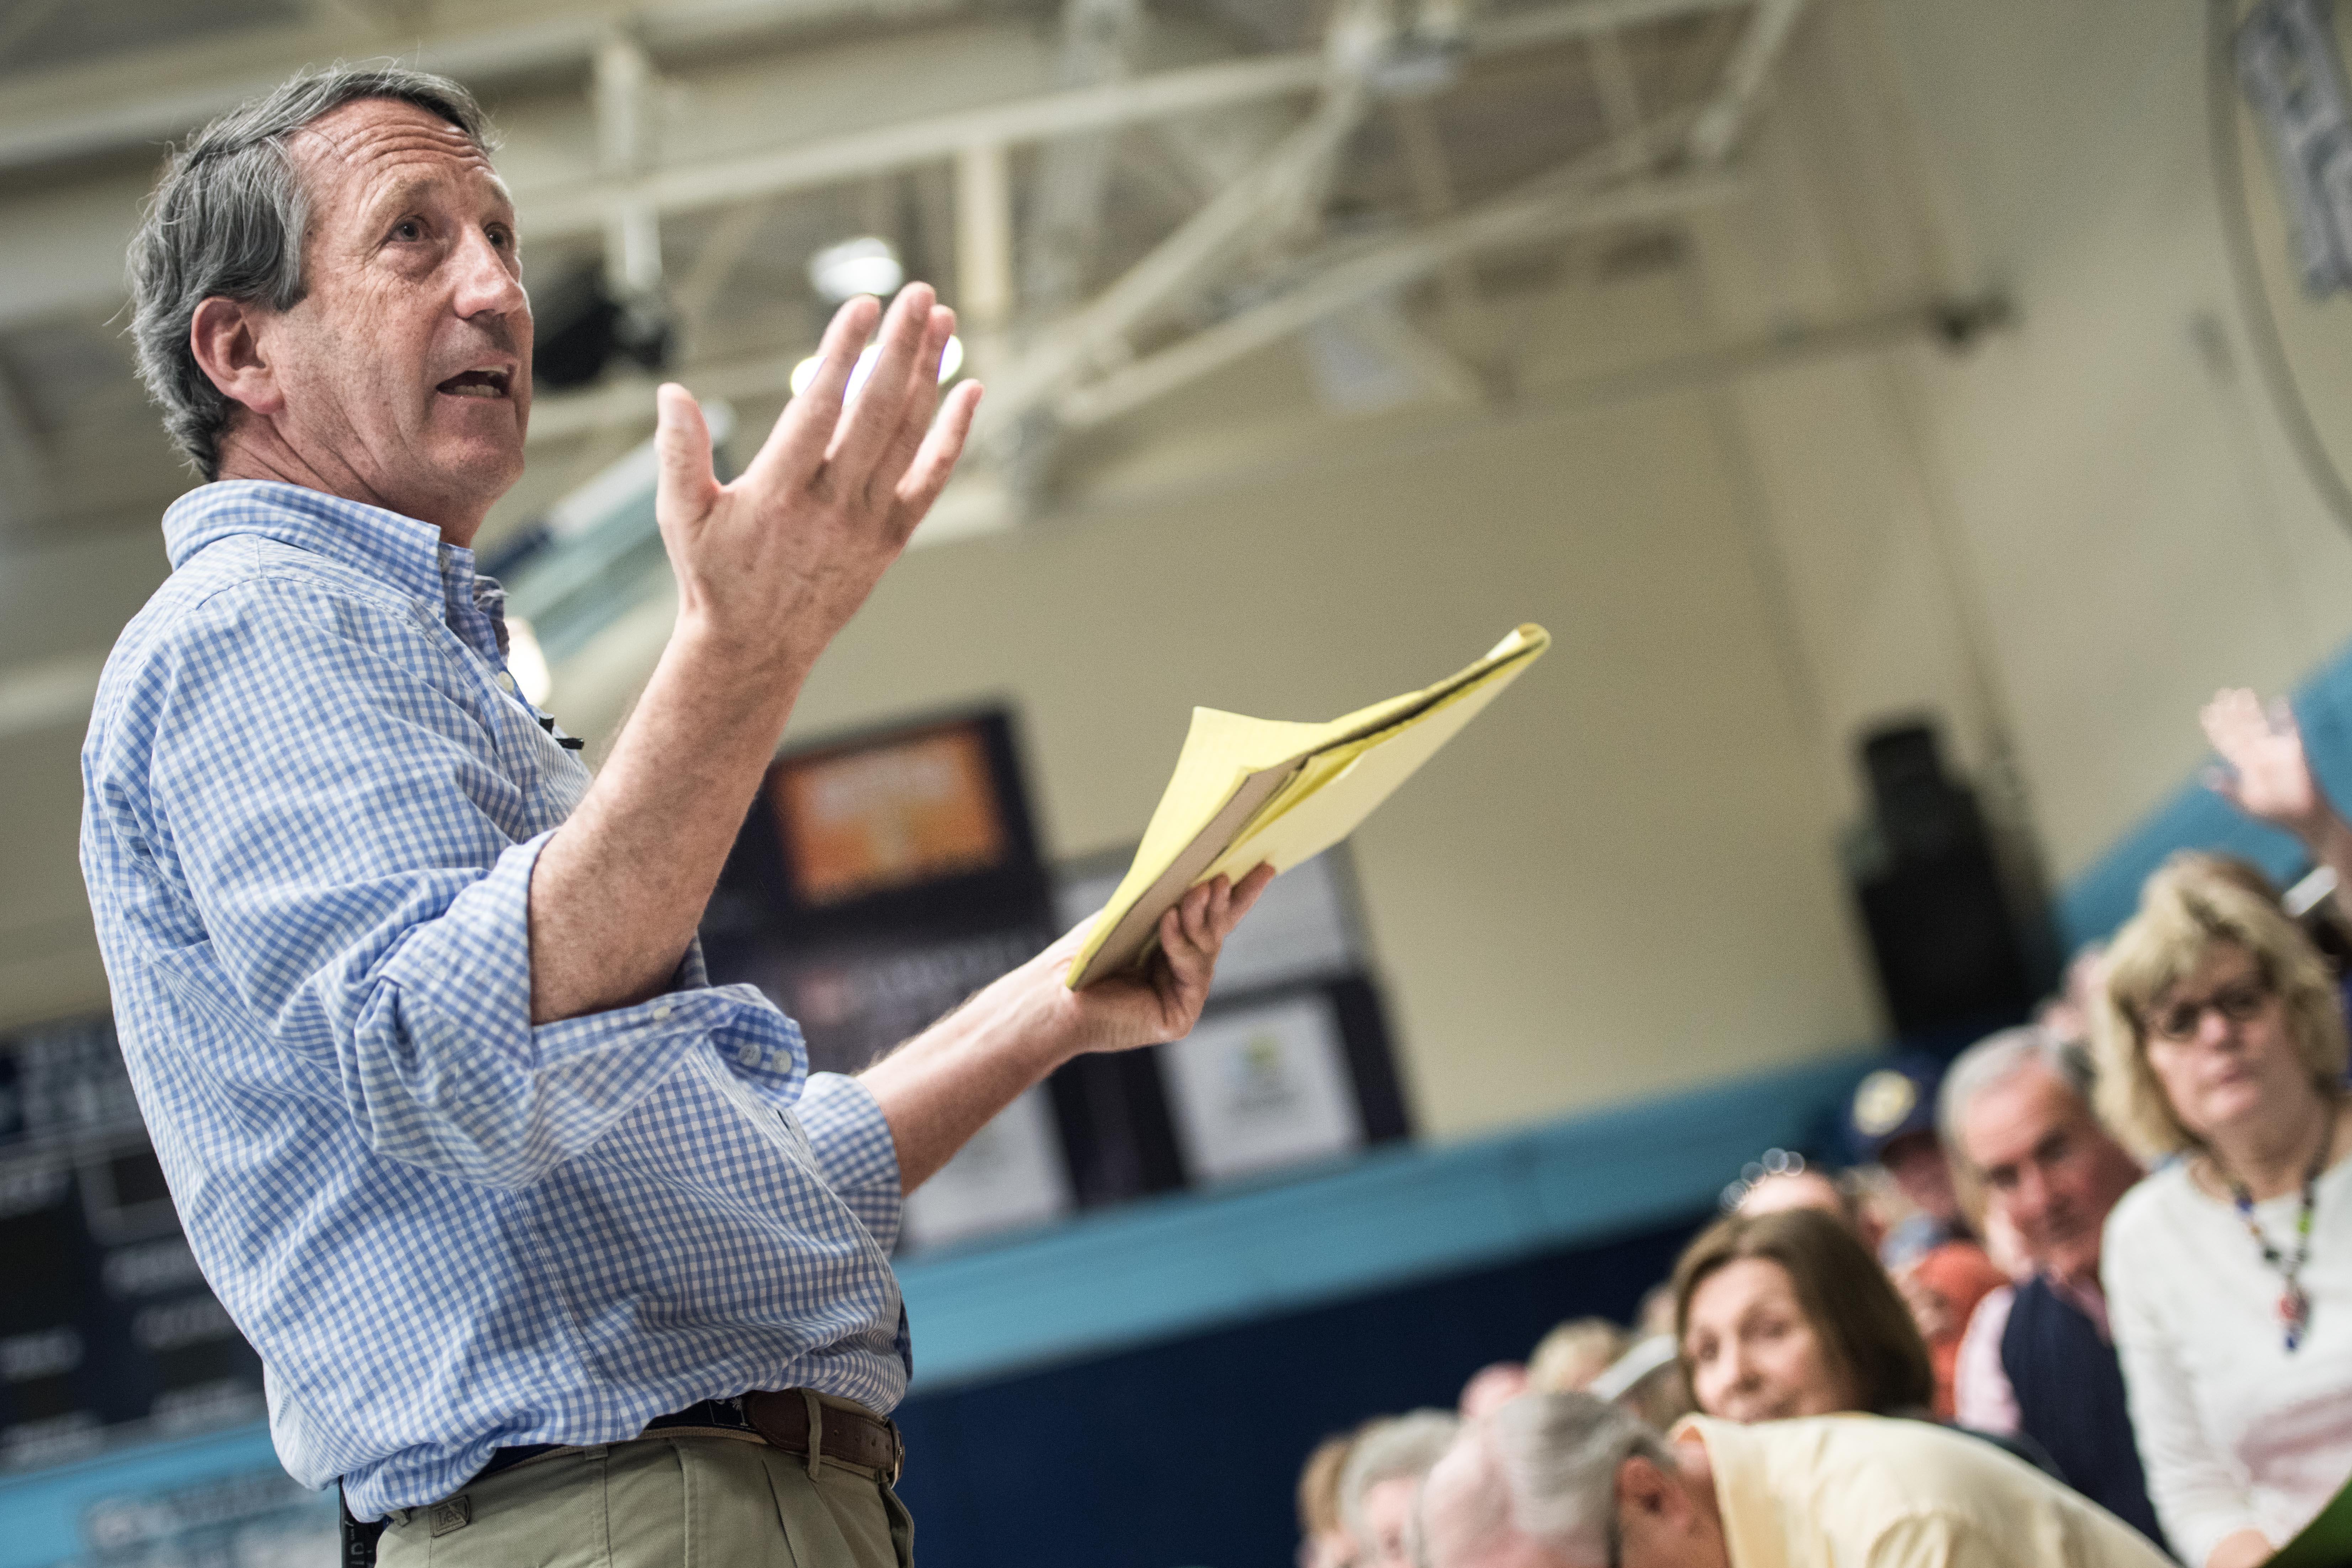 HILTON HEAD, SC - MARCH 18: Rep. Mark Sanford (R-SC) addresses the crowd during a town hall meeting March 18, 2017 in Hilton Head, South Carolina. Protestors have been showing up in large numbers to congressional town hall meetings across the nation. (Photo by Sean Rayford/Getty Images)